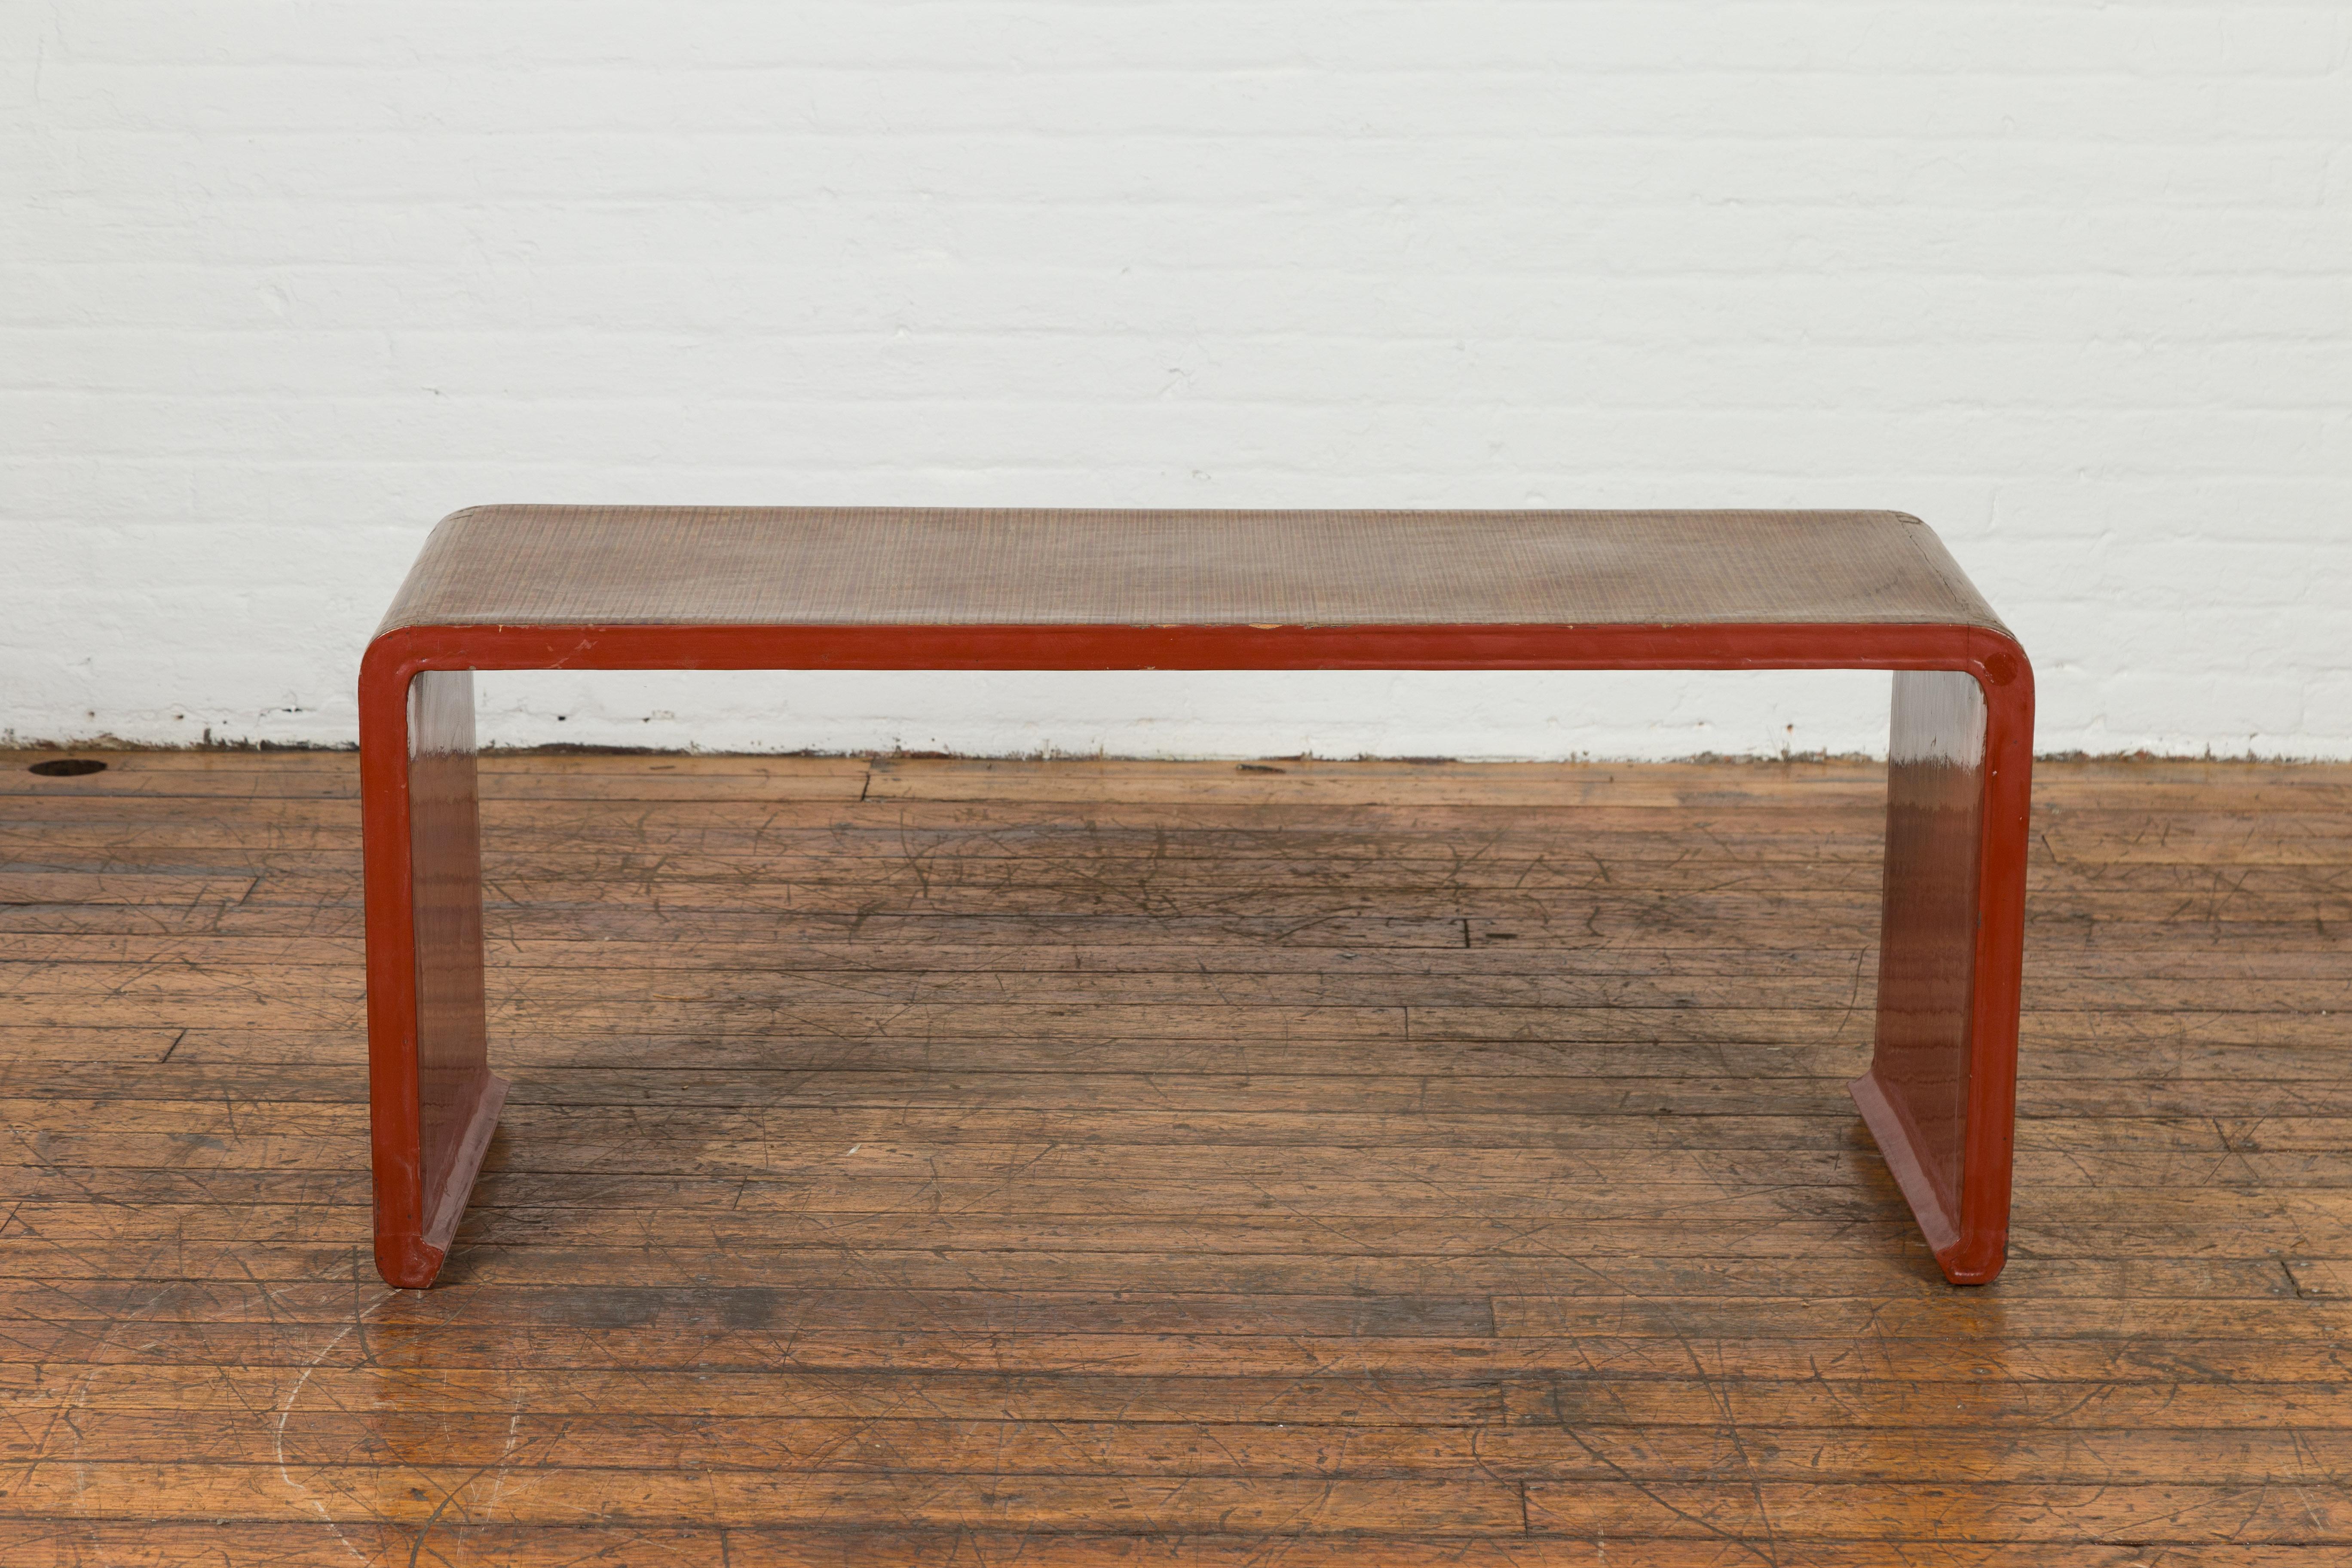 A vintage Burmese red lacquered waterfall coffee table from the Mid-20th century with Negora lacquered top, Japanese inspired design and scrolling extremities. Created in Burma during the Midcentury period, this waterfall coffee table features a